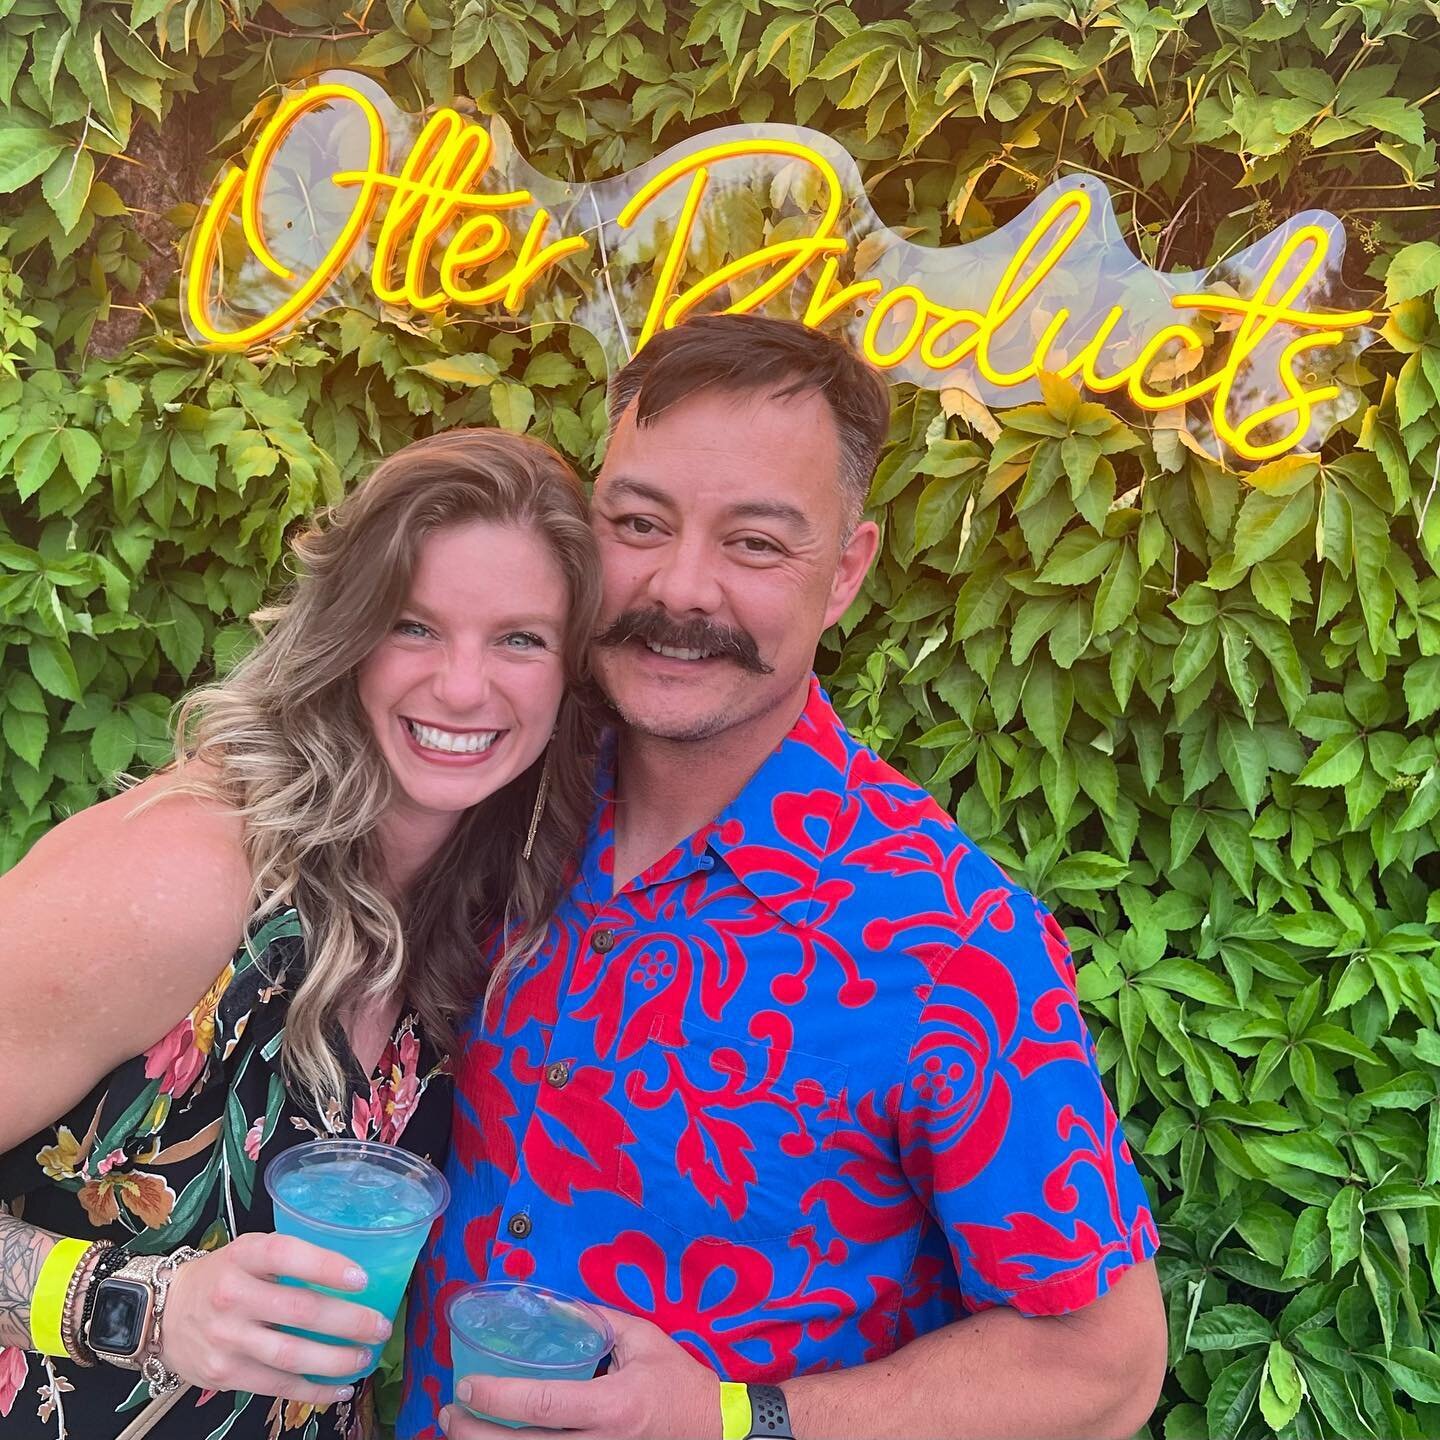 OtterBox Island Soir&eacute;e with my bae! ❤️🦦
&bull;
&bull;
&bull;
&bull;
&bull;
#swolemates #otterbox #cleanupgoodtho #fridaynightout #windsor #strongwomen #bettertogether #celebrategoodtimes #cutiepatooties #timetoparty #liveitup #datenight #myhe